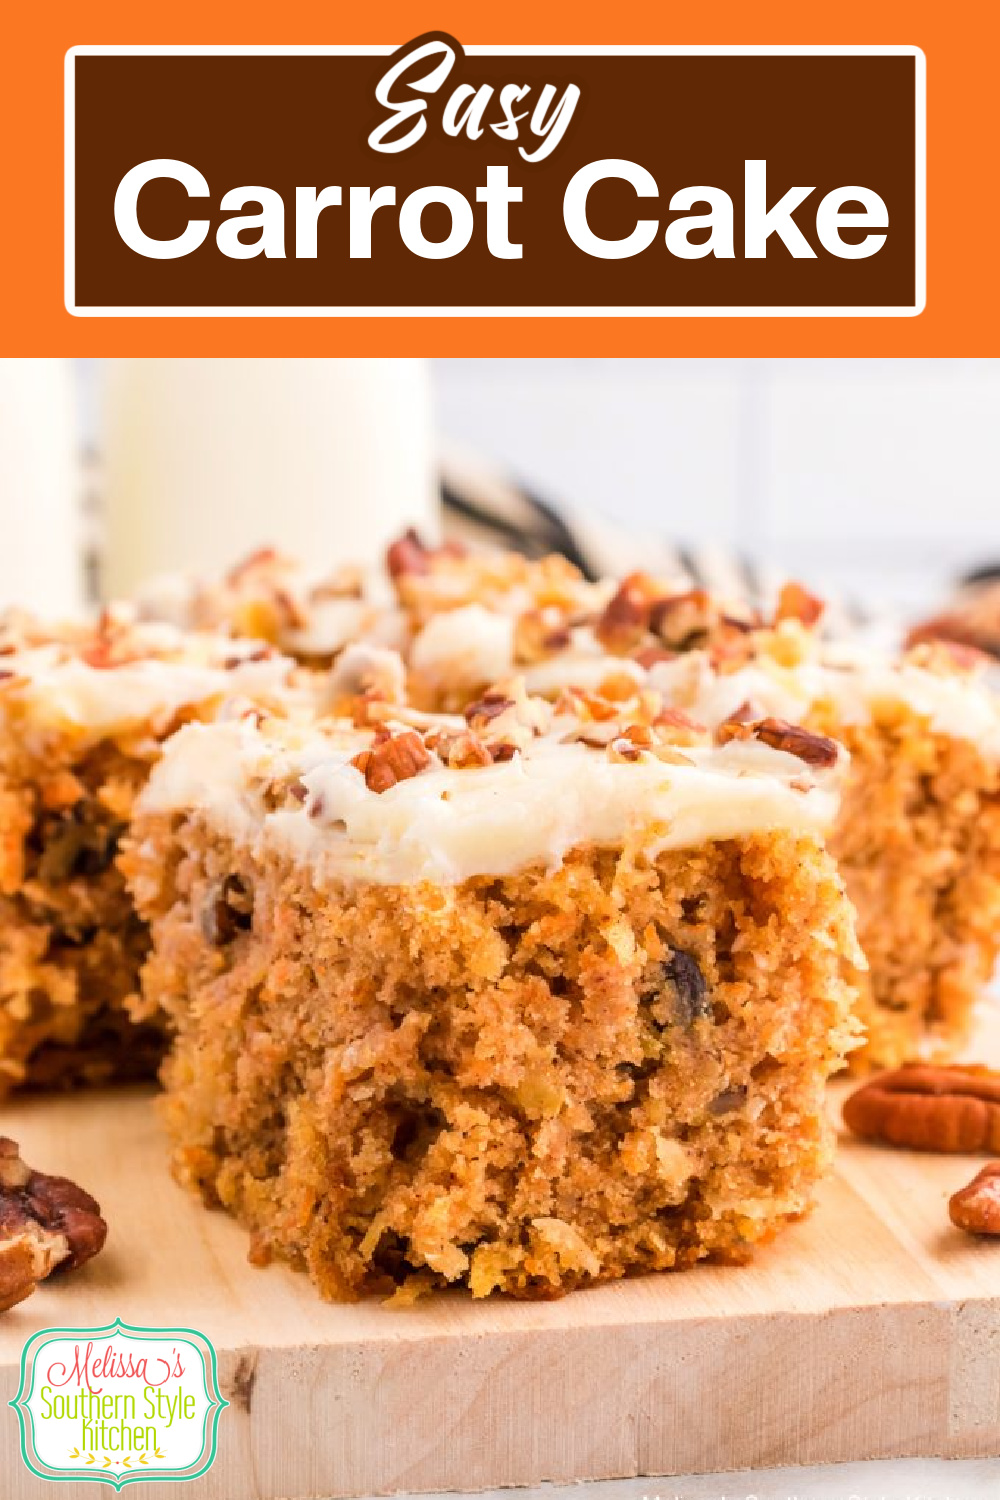 This Easy Carrot Cake Recipe with cream cheese frosting will make a delicious addition to your special occasion desserts menu #carrotcake #sheetcakerecipes #homemadecarrotcake #easterdesserts #homemadecakerecipe #southerncarrotcake #easycarrotcakerecipe #bestcarrotcake